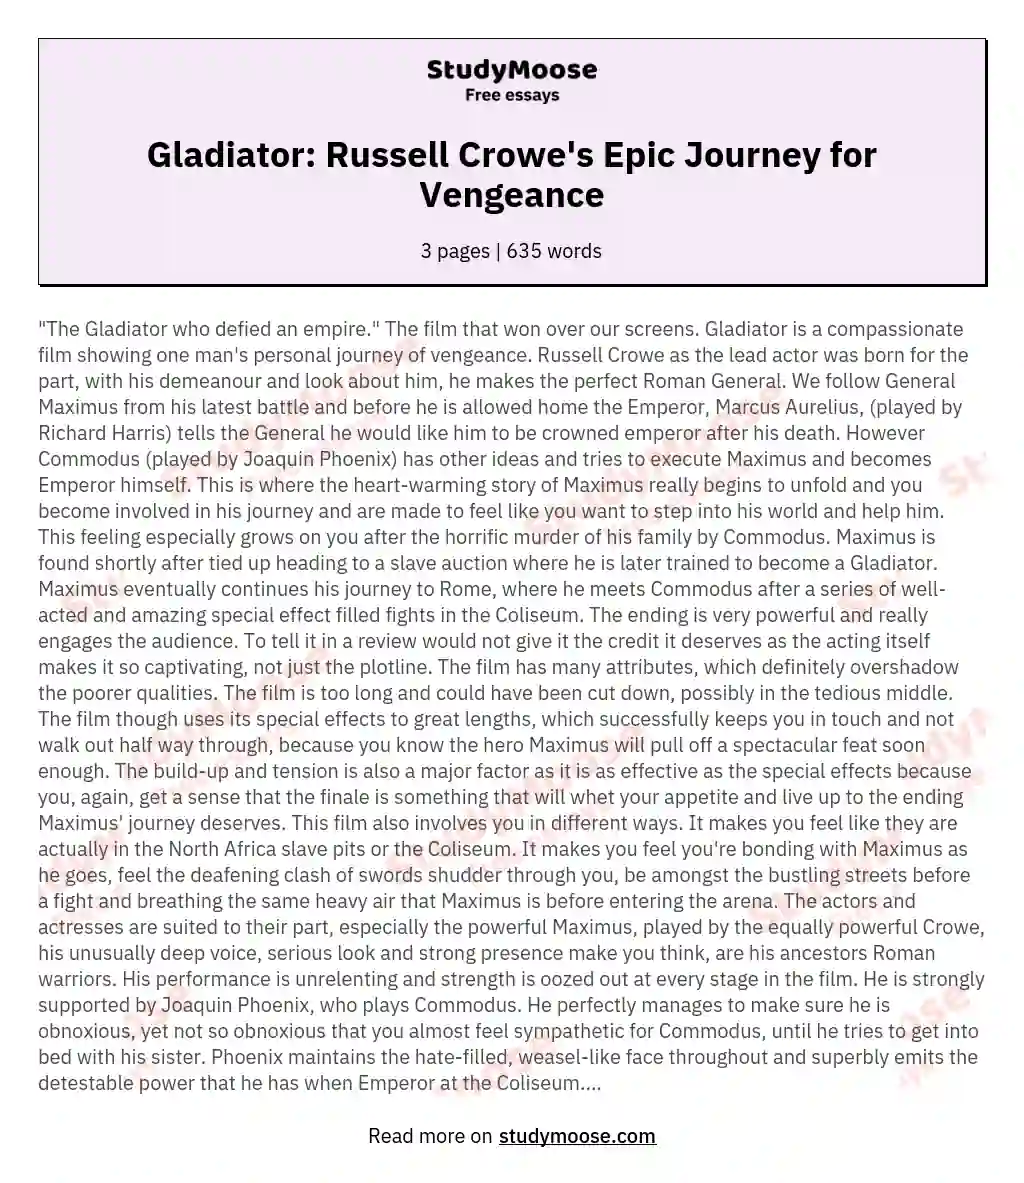 Gladiator: Russell Crowe's Epic Journey for Vengeance essay